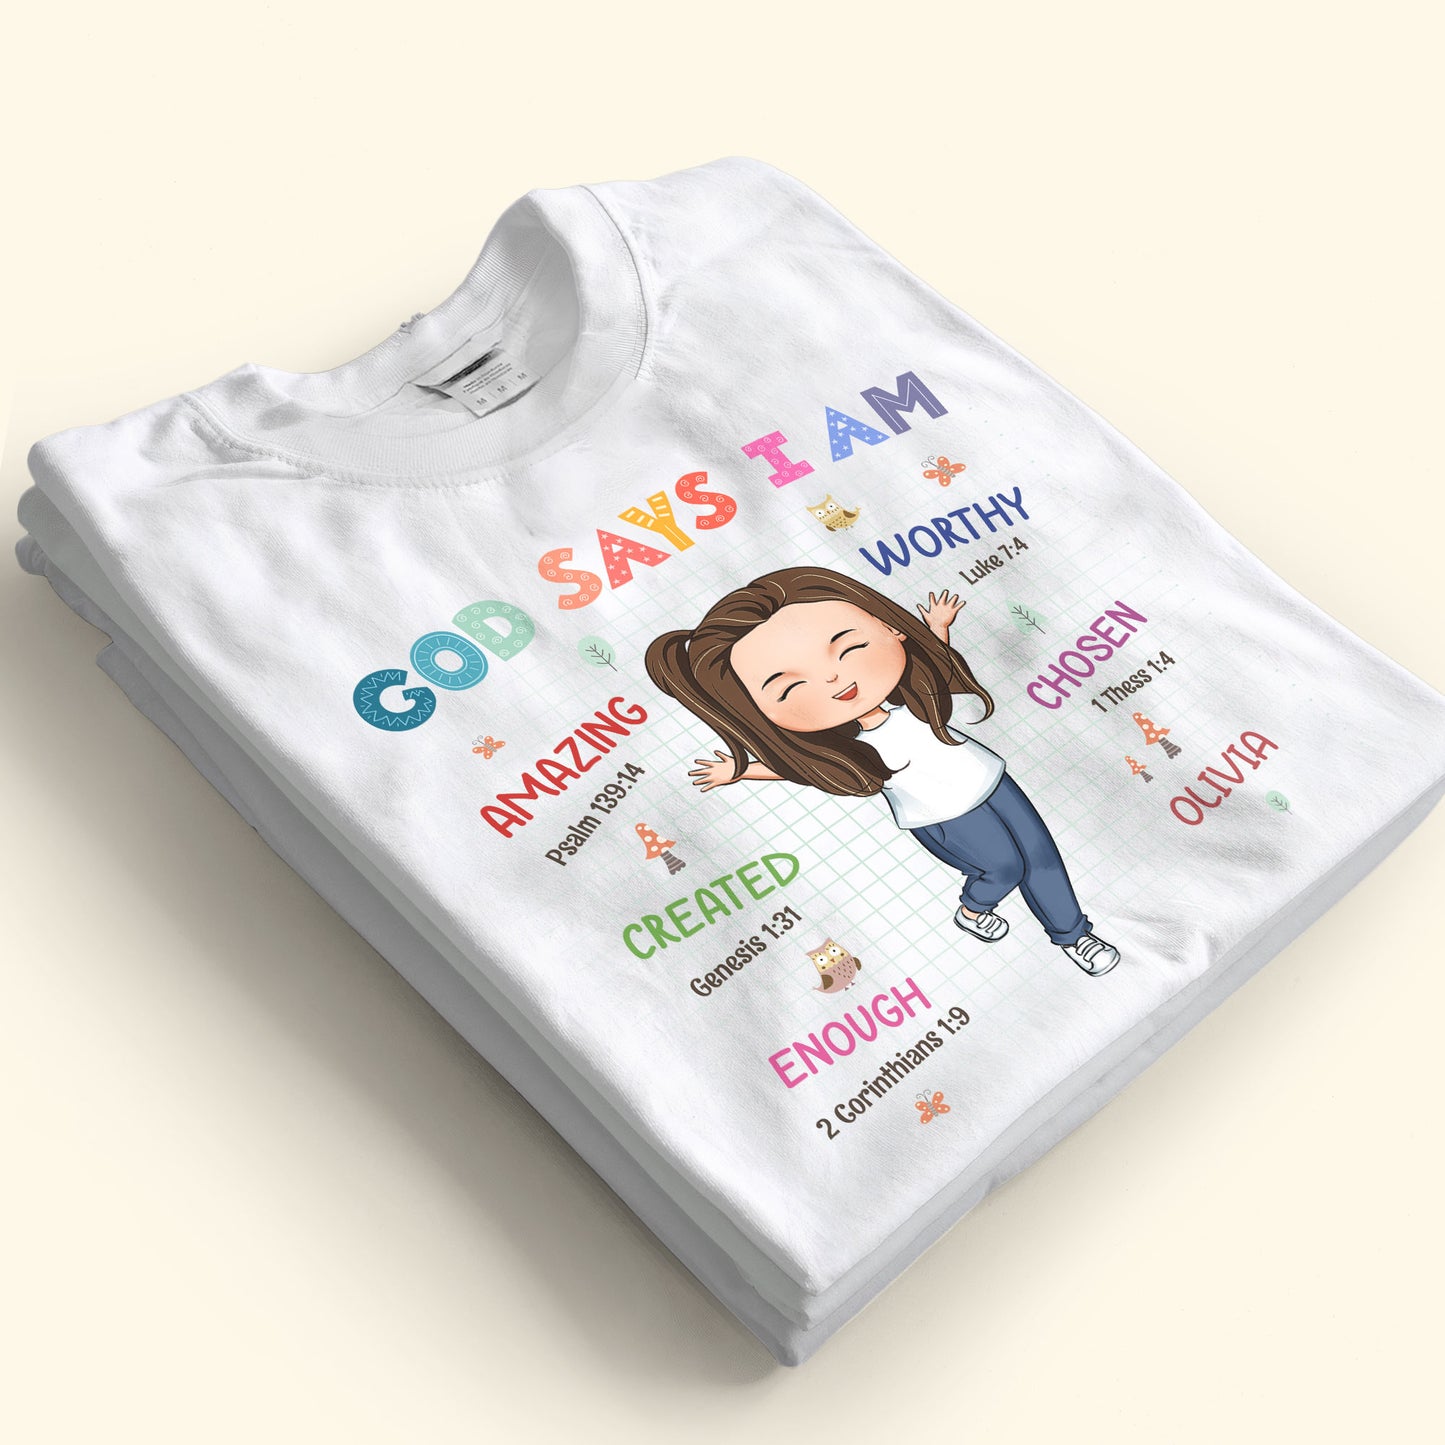 God Says I Am For Kids - Personalized Shirt